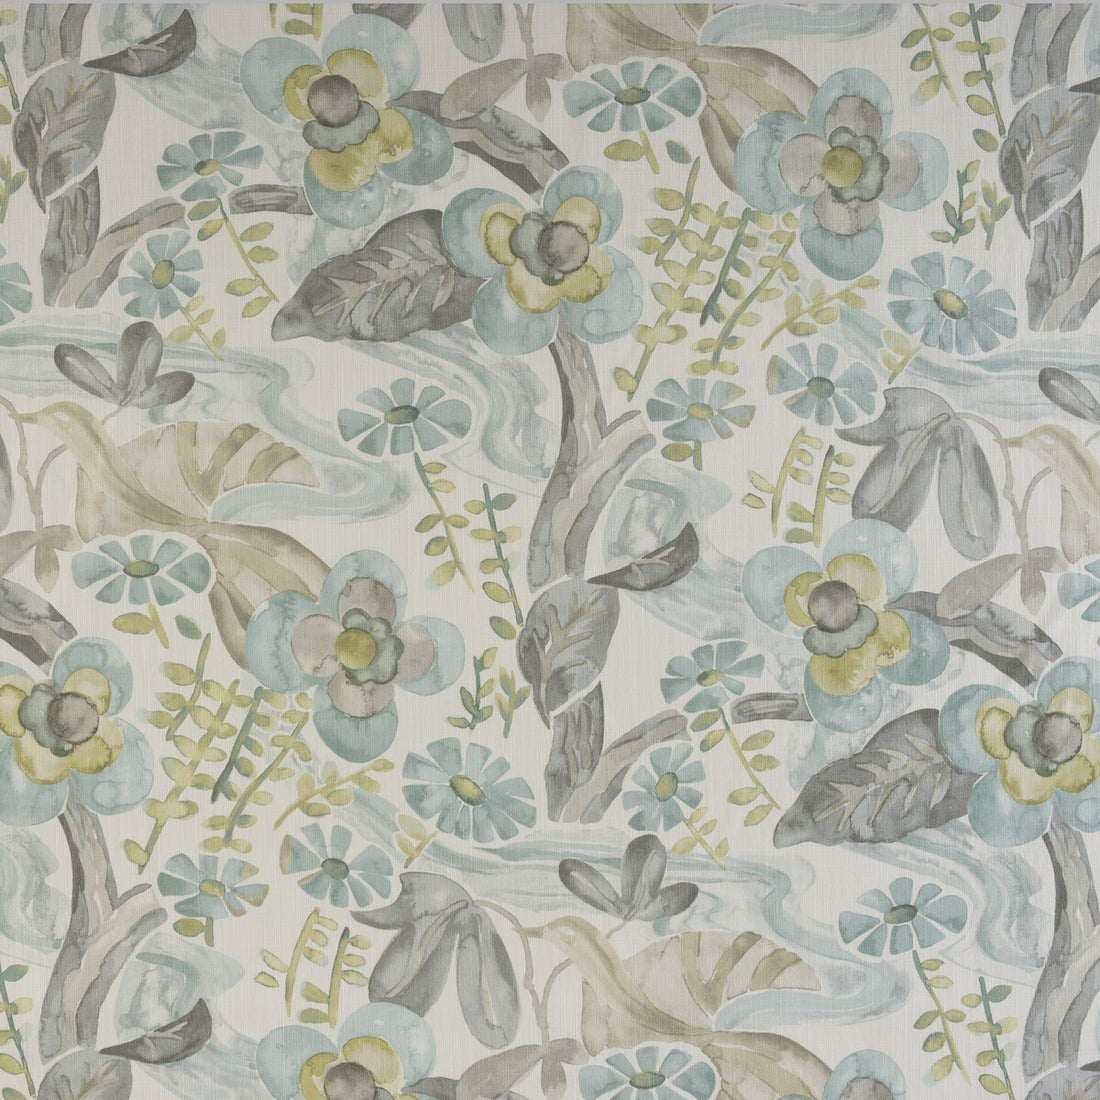 Faerie fabric in oasis color - pattern FAERIE.135.0 - by Kravet Design in the Barbara Barry Home Midsummer collection